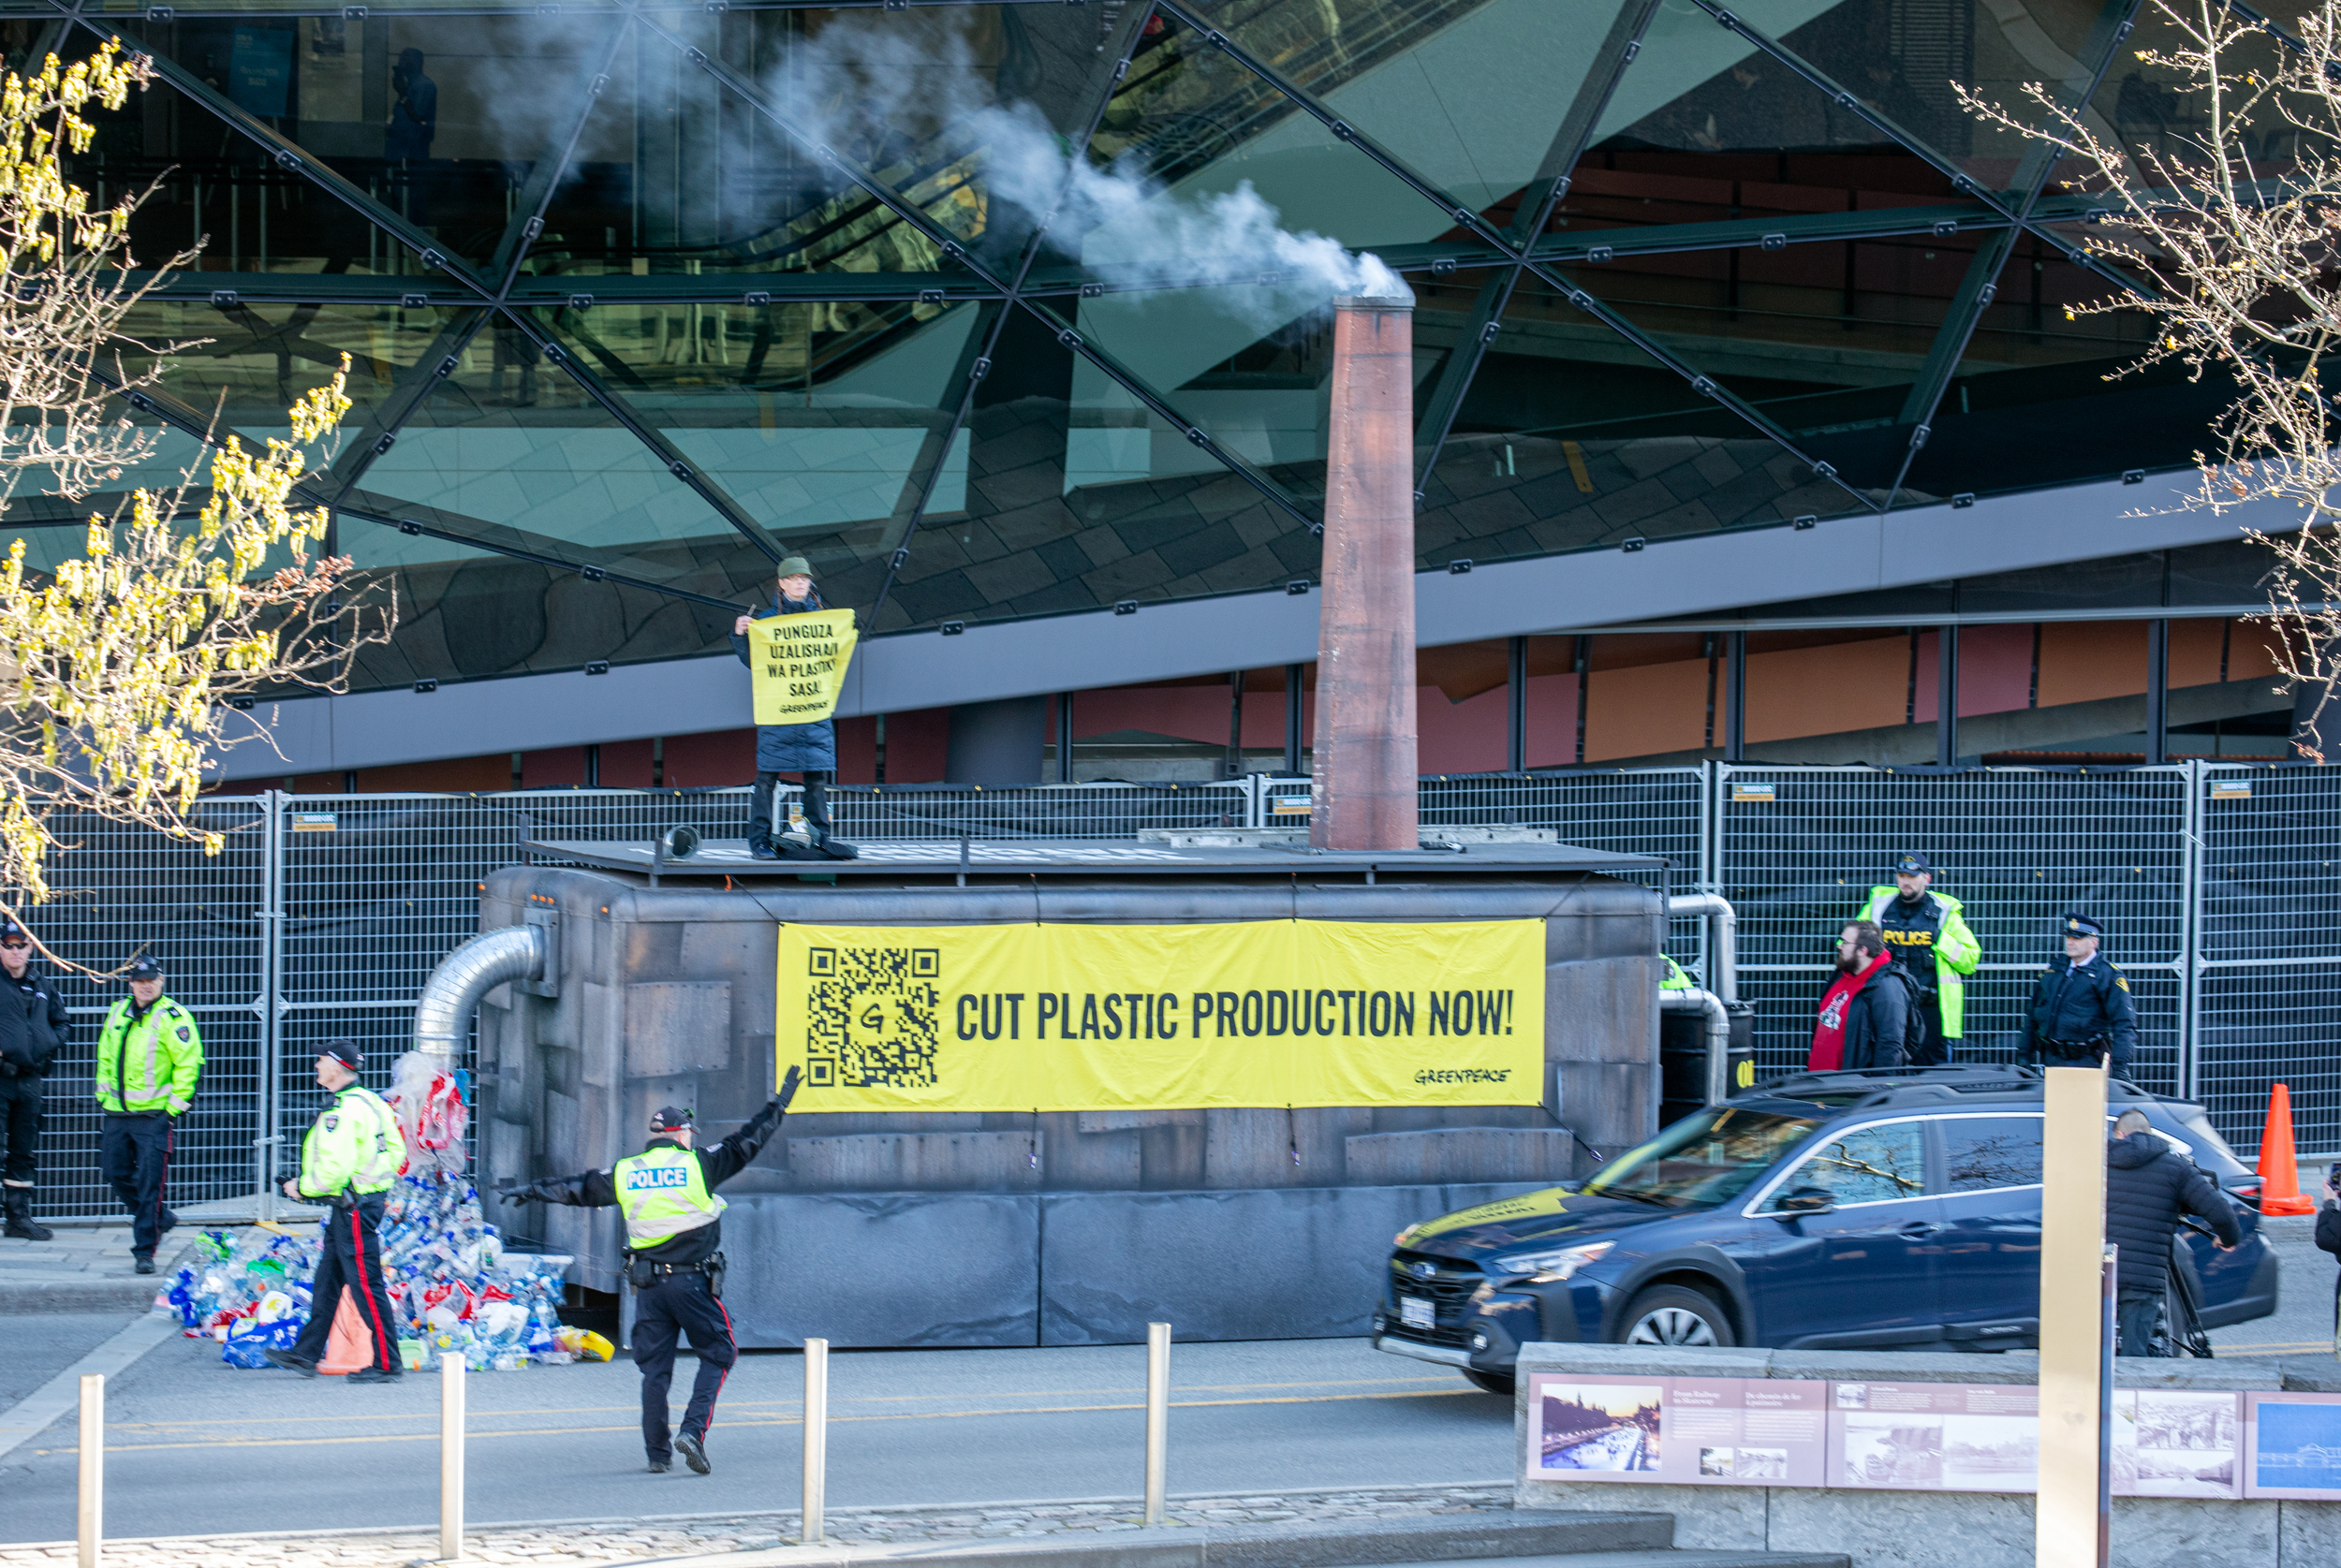 Mock factory with a smoking smokestack with a banner saying 'cut plastic production now'. Police in the foreground look bemused.